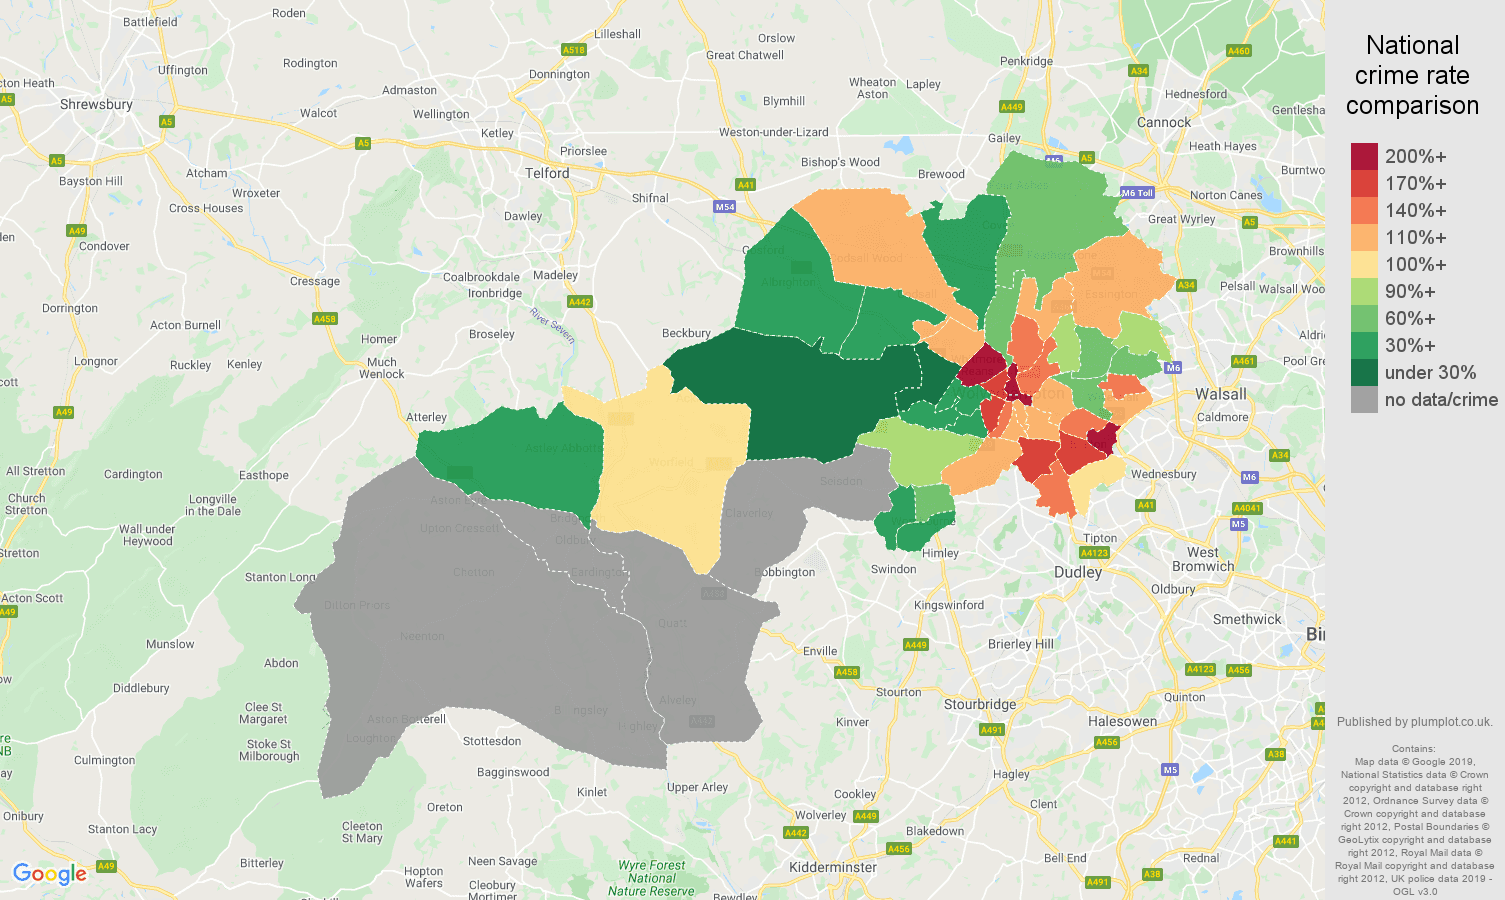 Wolverhampton possession of weapons crime rate comparison map